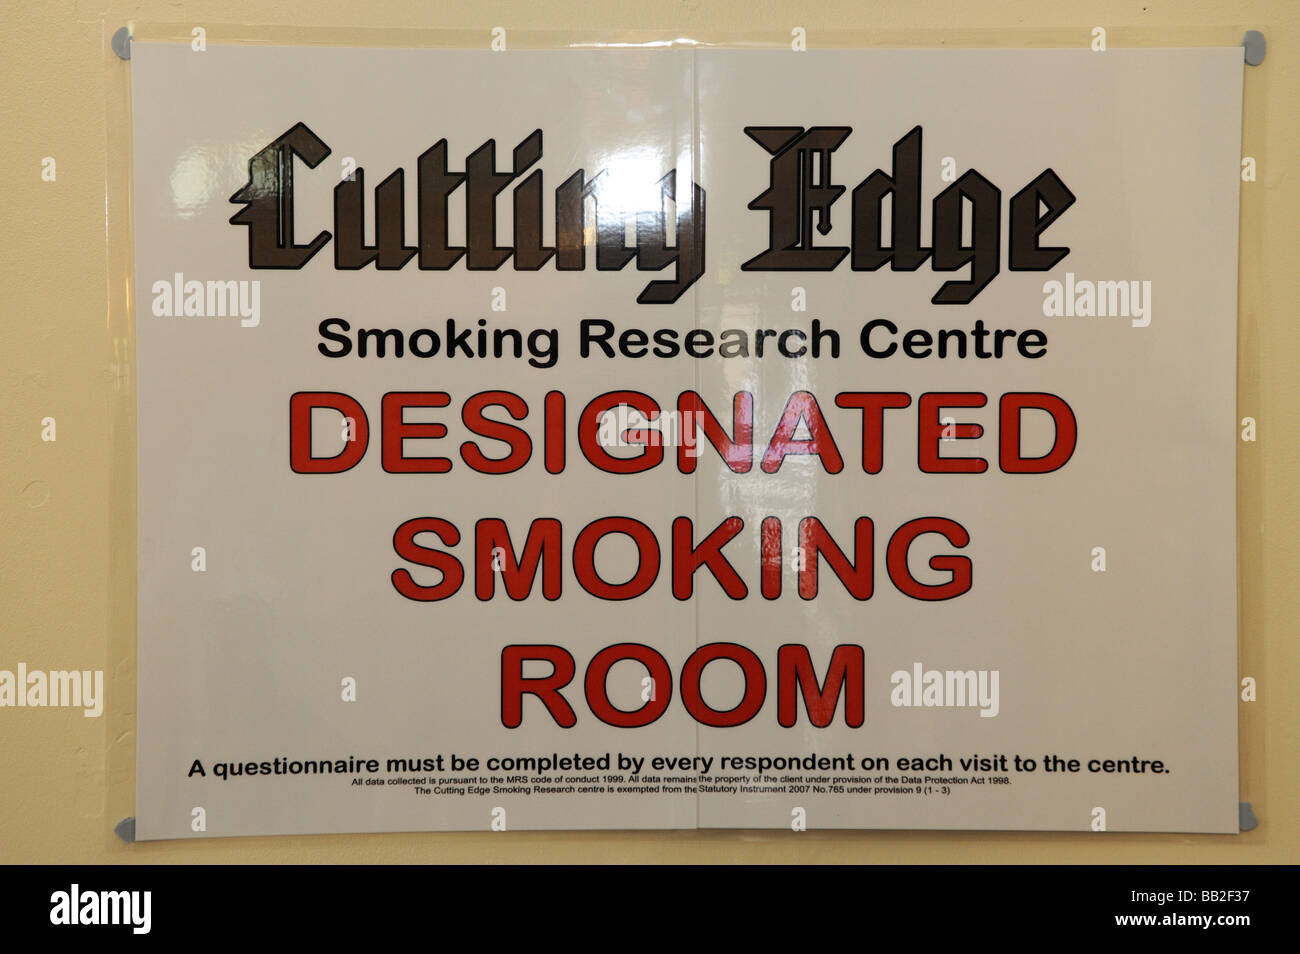 Cutting Edge Pub in Barnsley where customers are allowed to smoke, they have turned a room into a Smoking Research Centre. Stock Photo